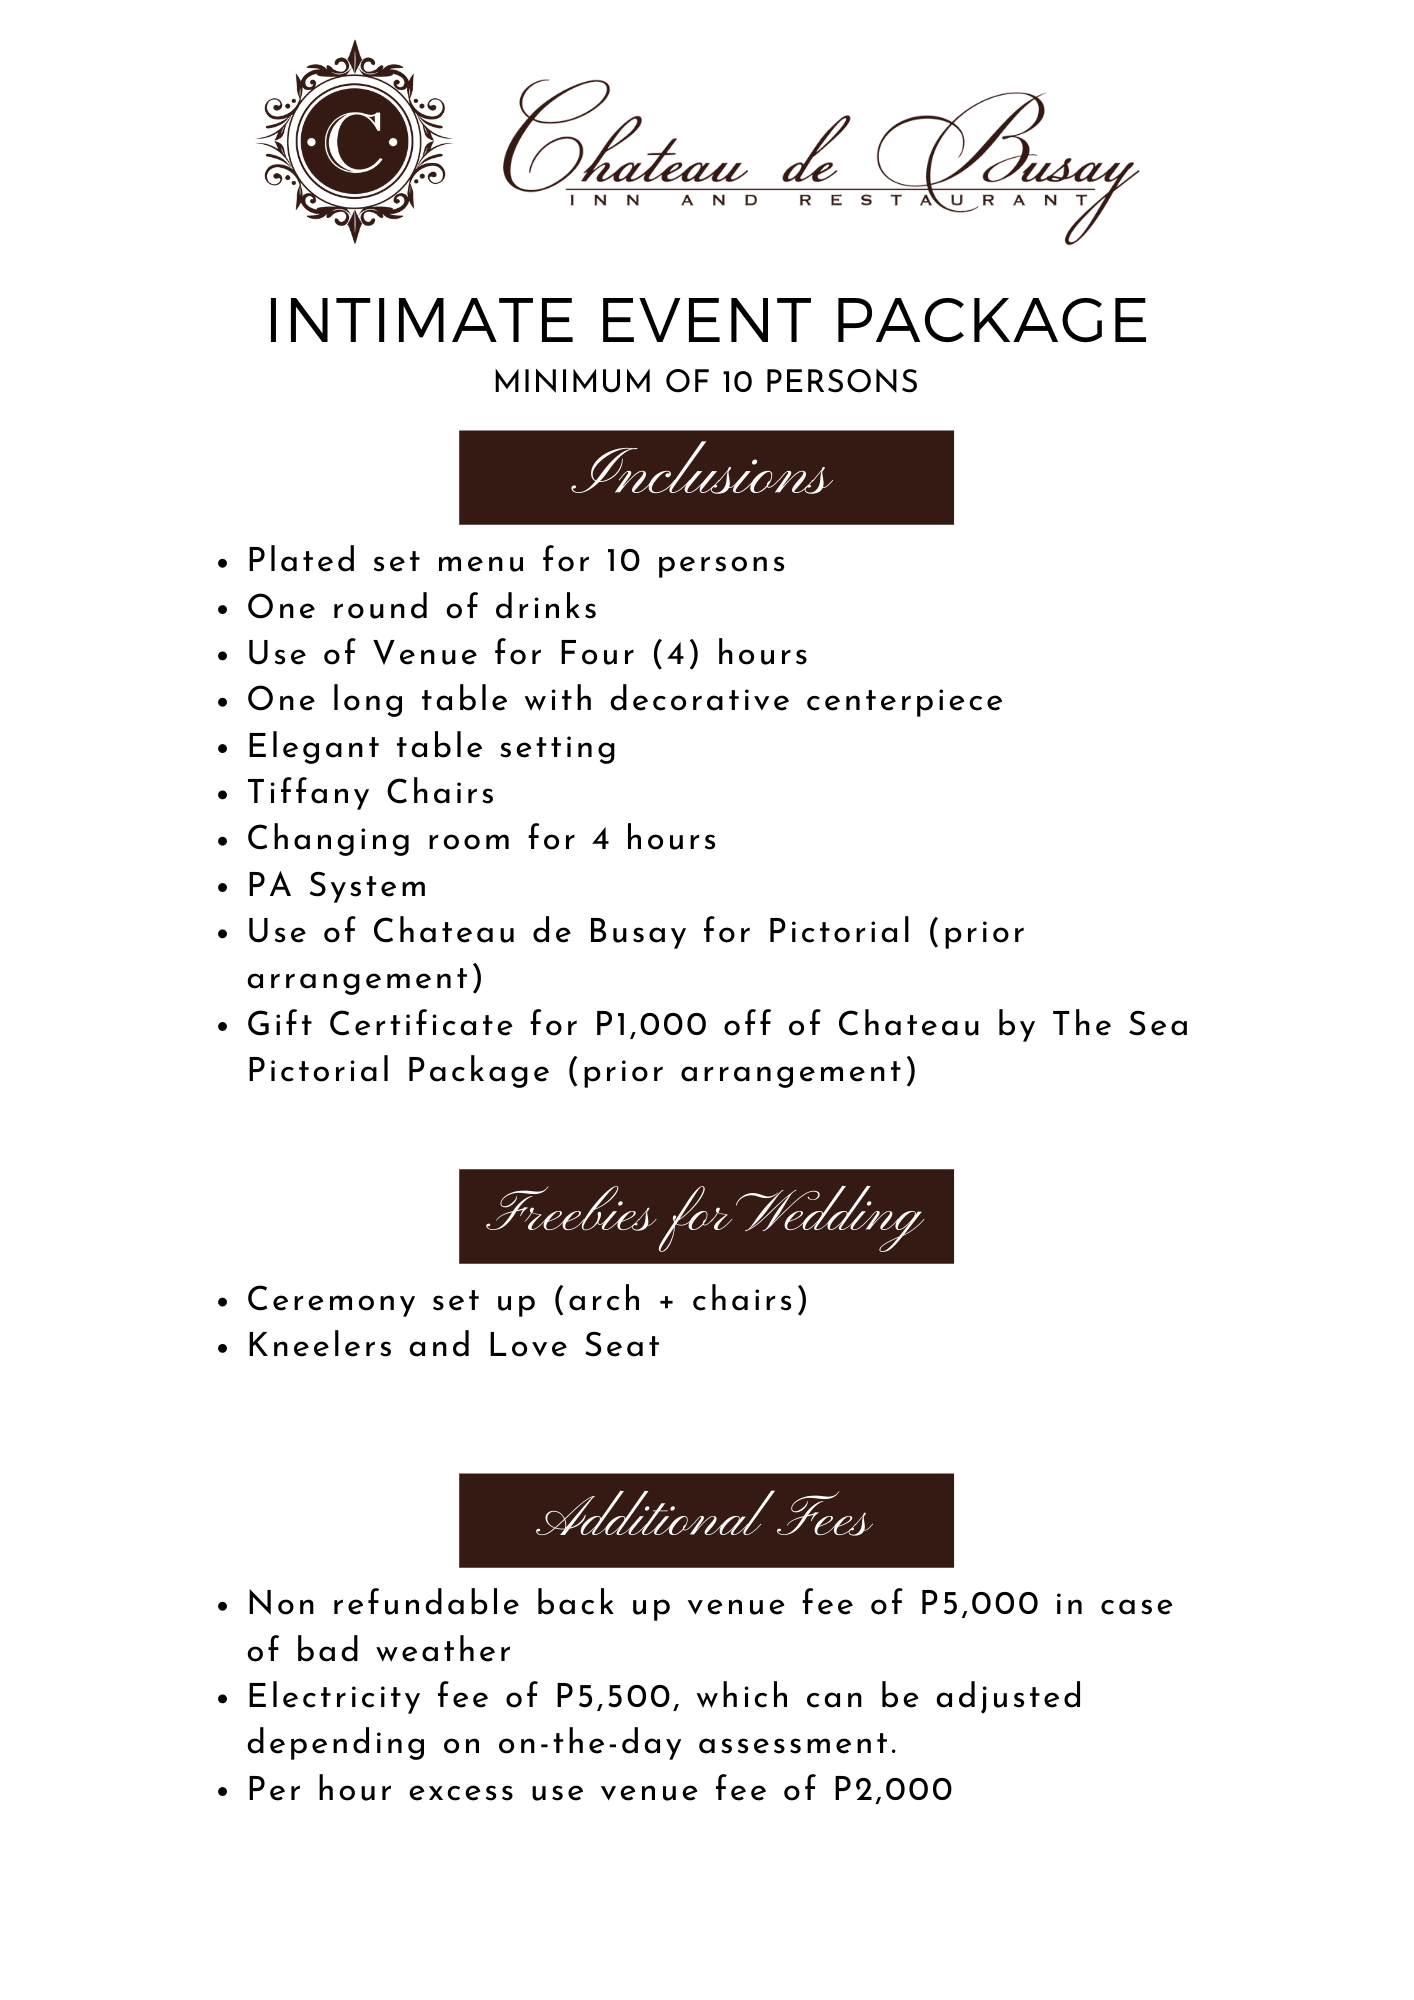 Intimate Package